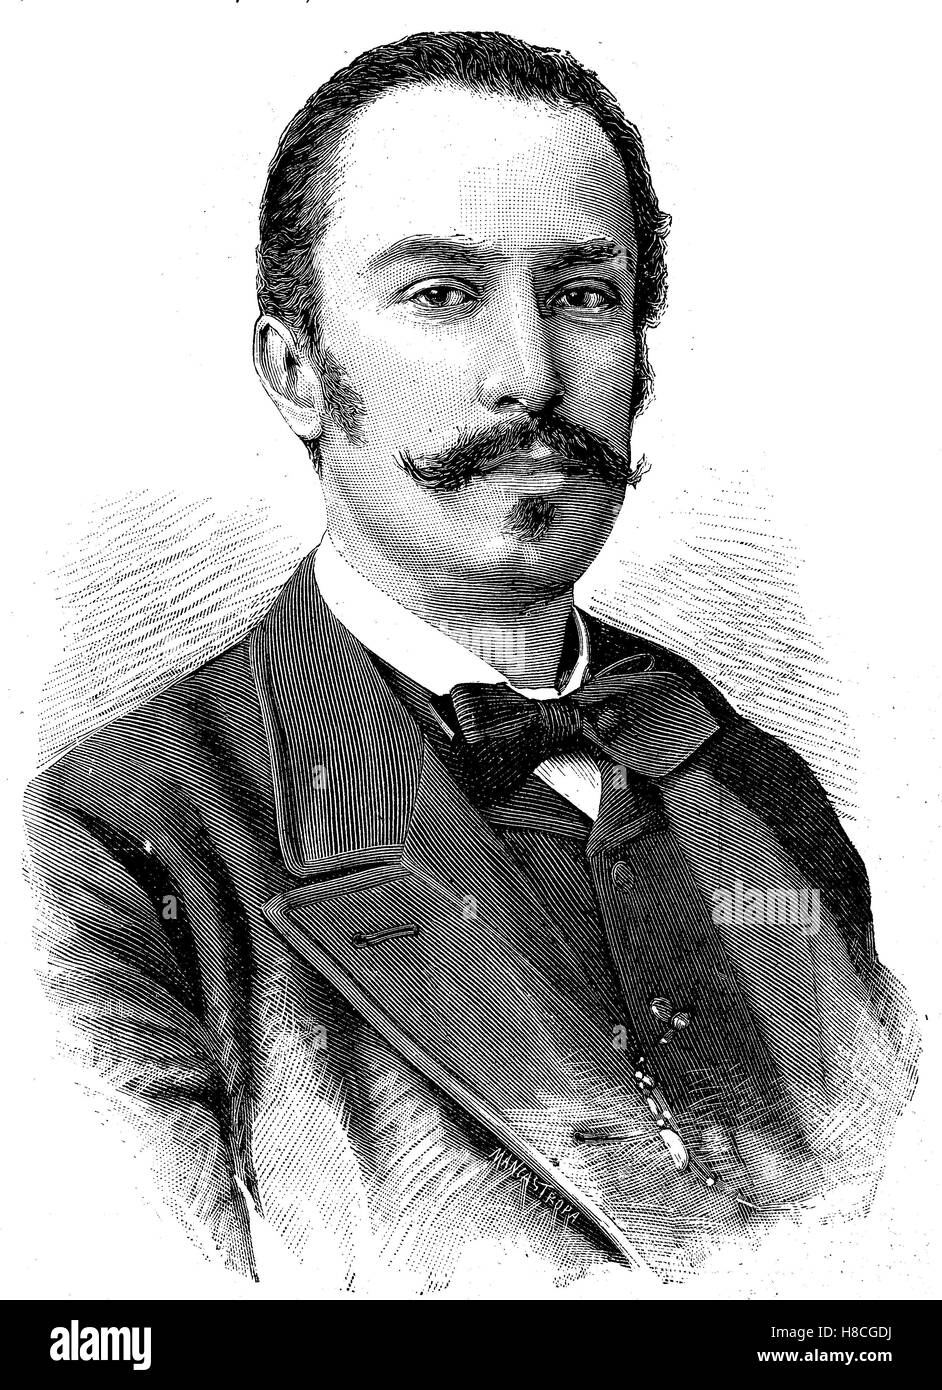 Giovanni Giolitti; October 27, 1842 - July 17, 1928, was an Italian statesman. He was the Prime Minister of Italy five times between 1892 and 1921, Woodcut from 1892 Stock Photo